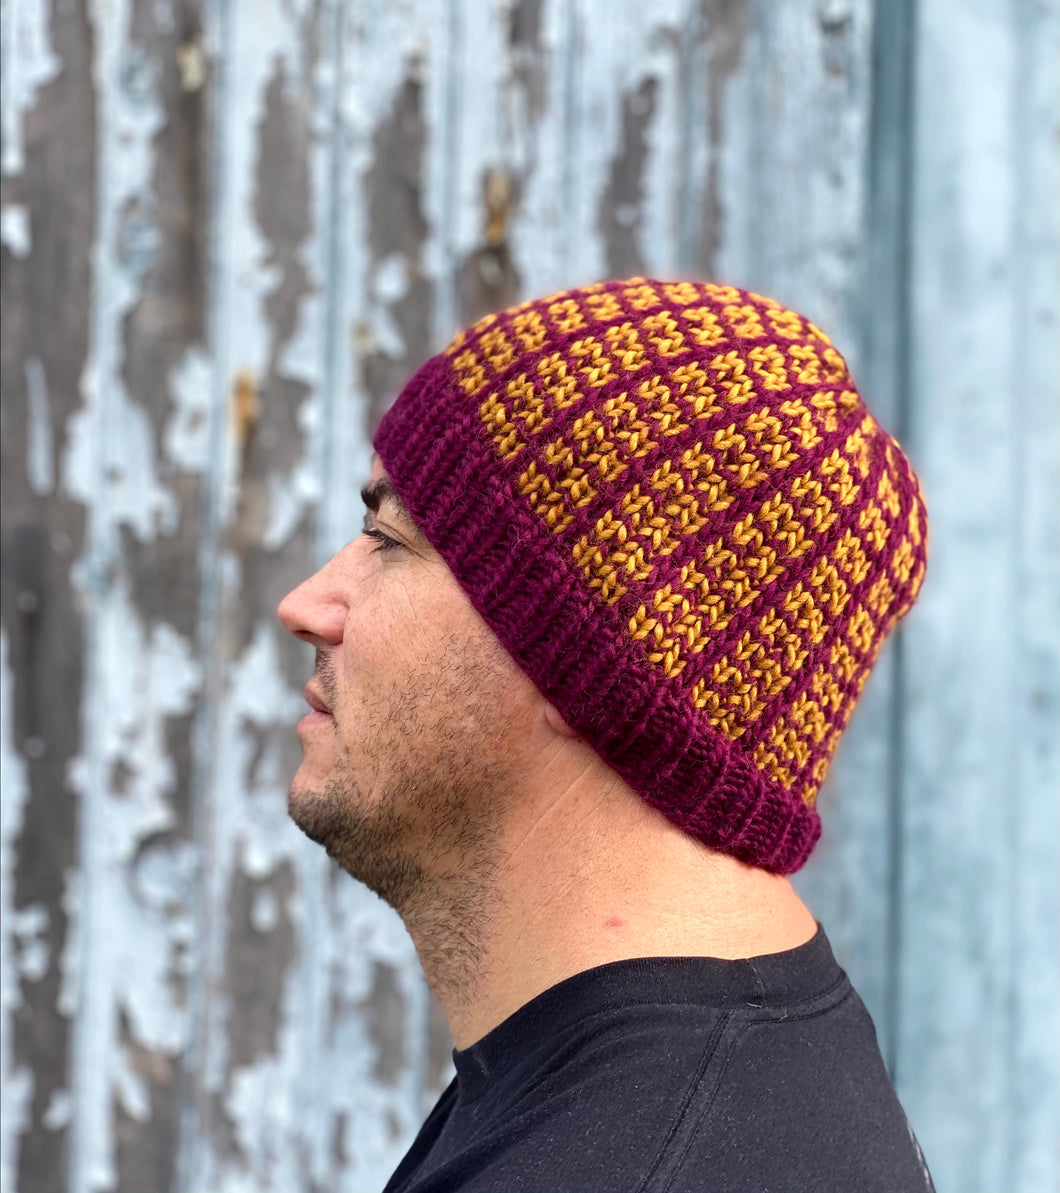 Beanie for the Boyz Man beanie fitted cozy handsome knit hat maroon gold guys wool cap